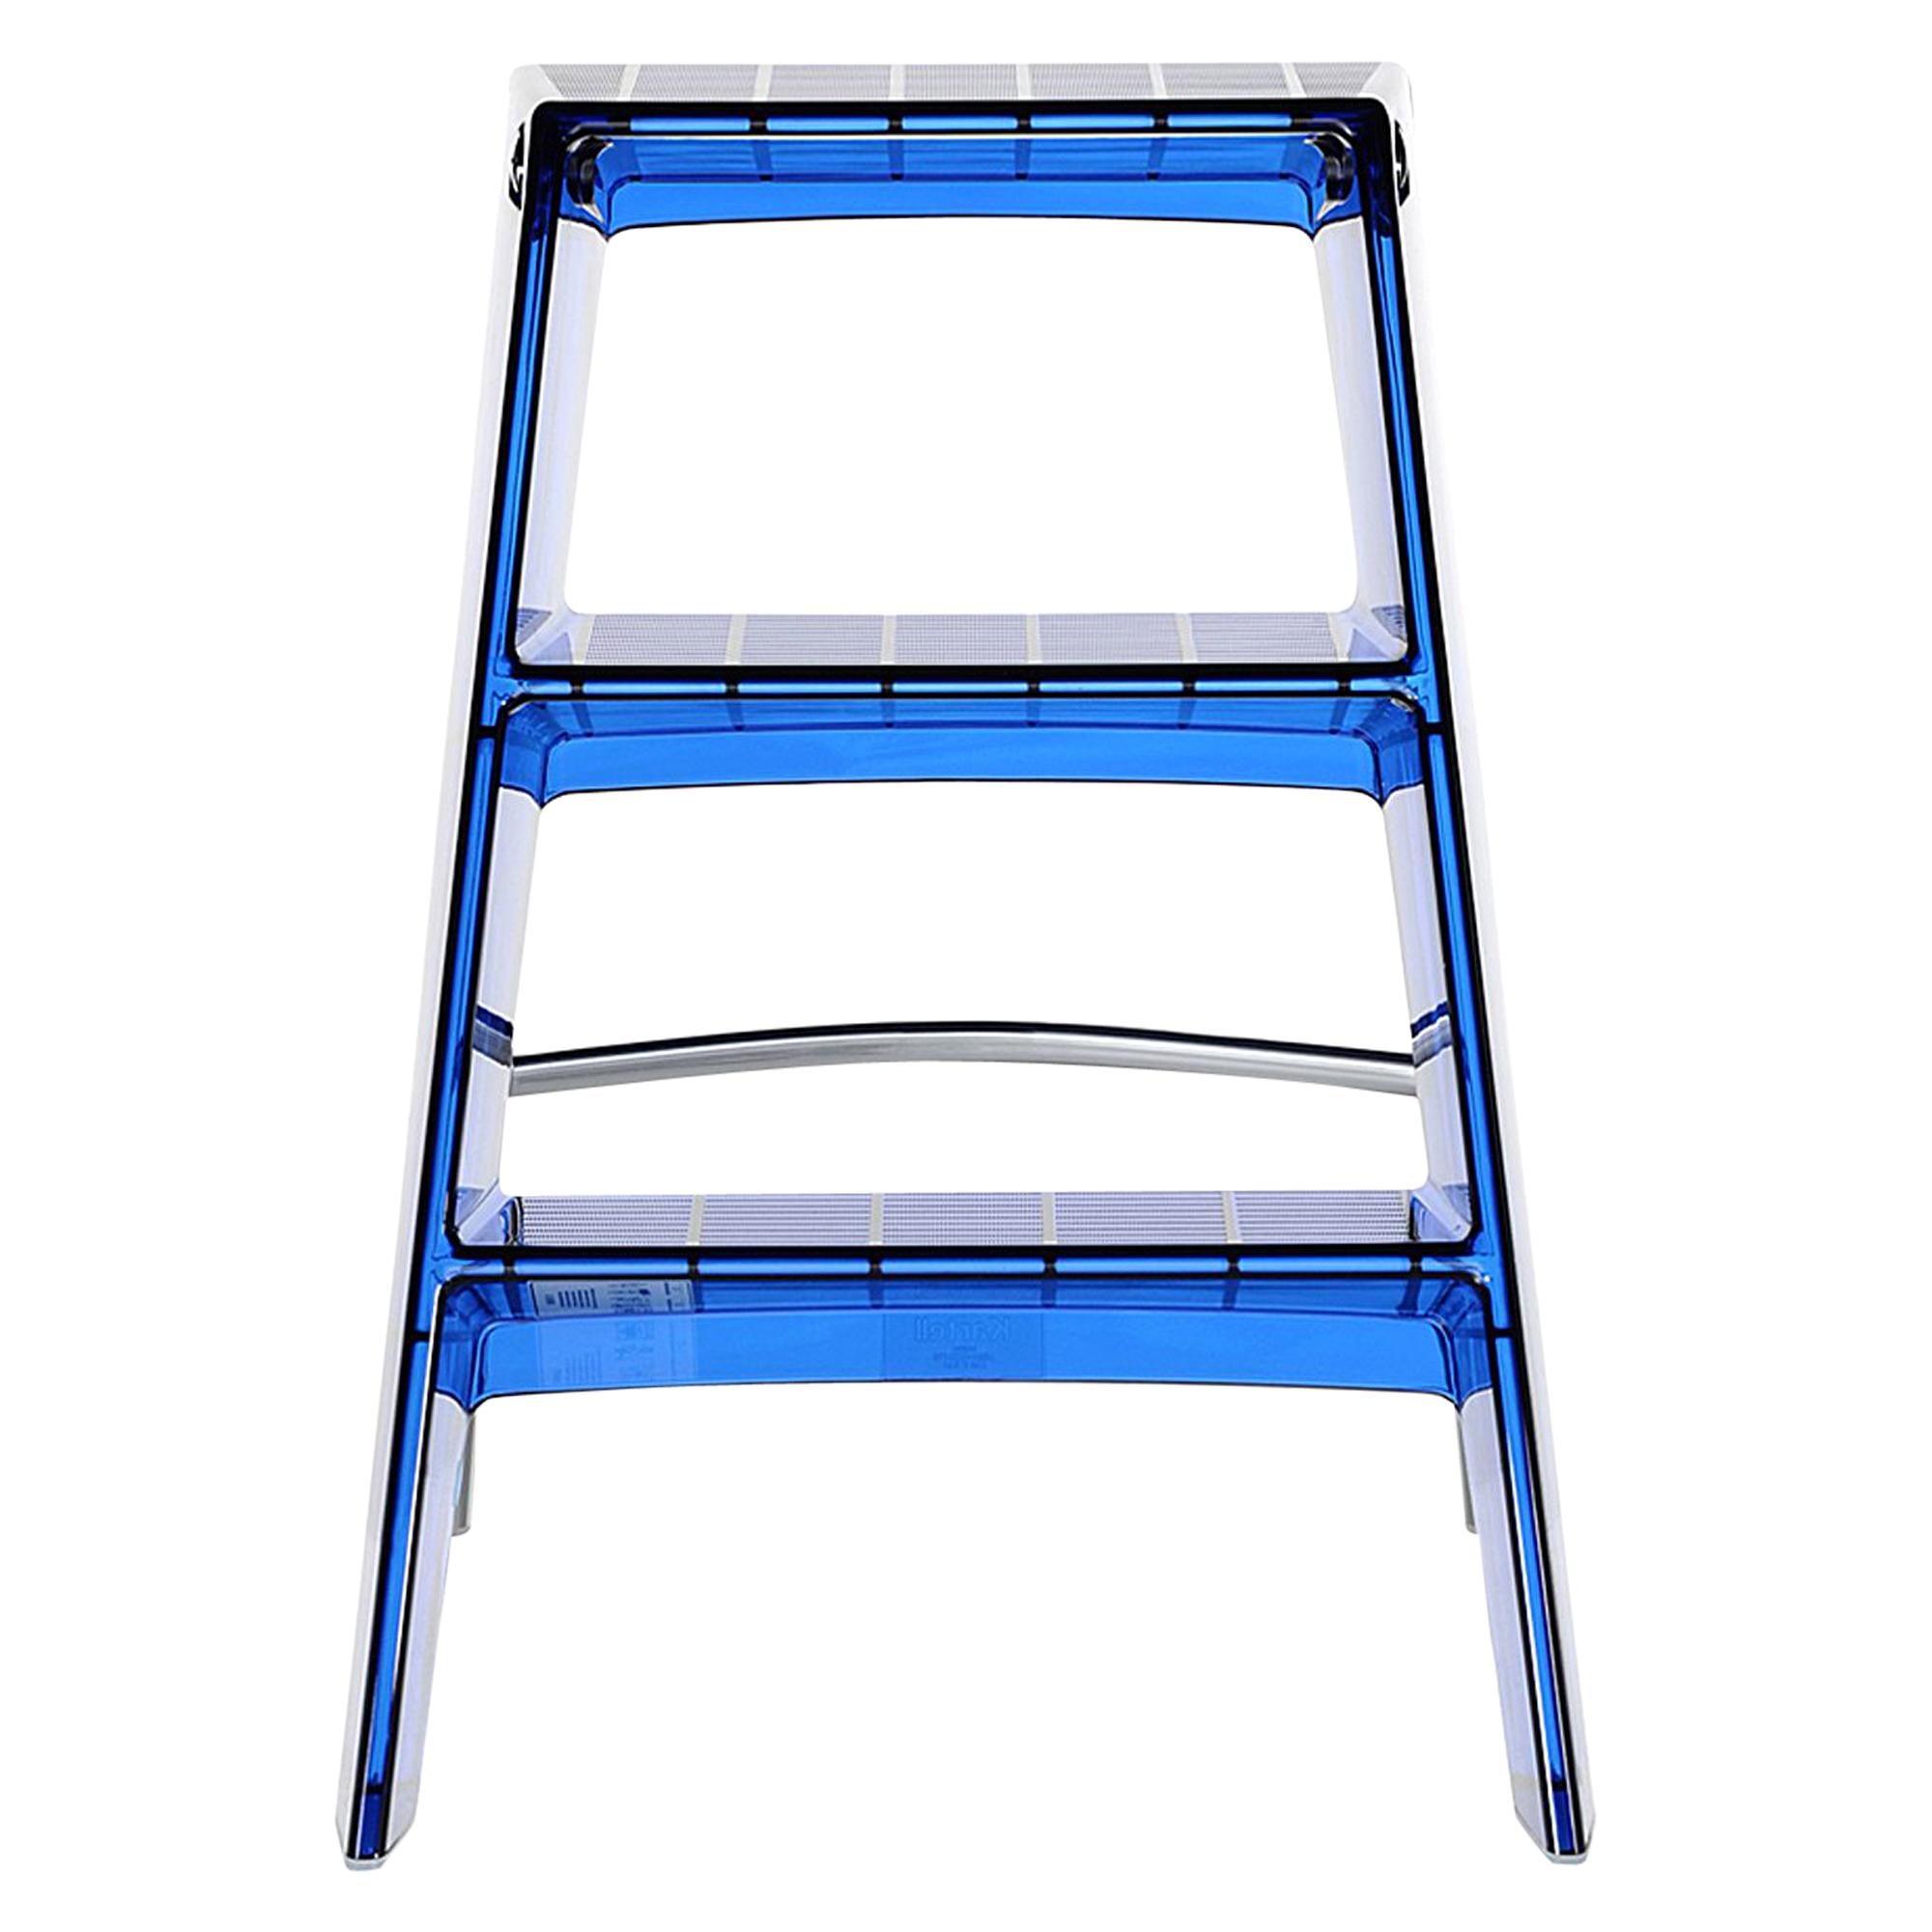 Kartell Upper Step Ladder in Cobalt by Alberto Meda, Paolo Rizzatto For Sale